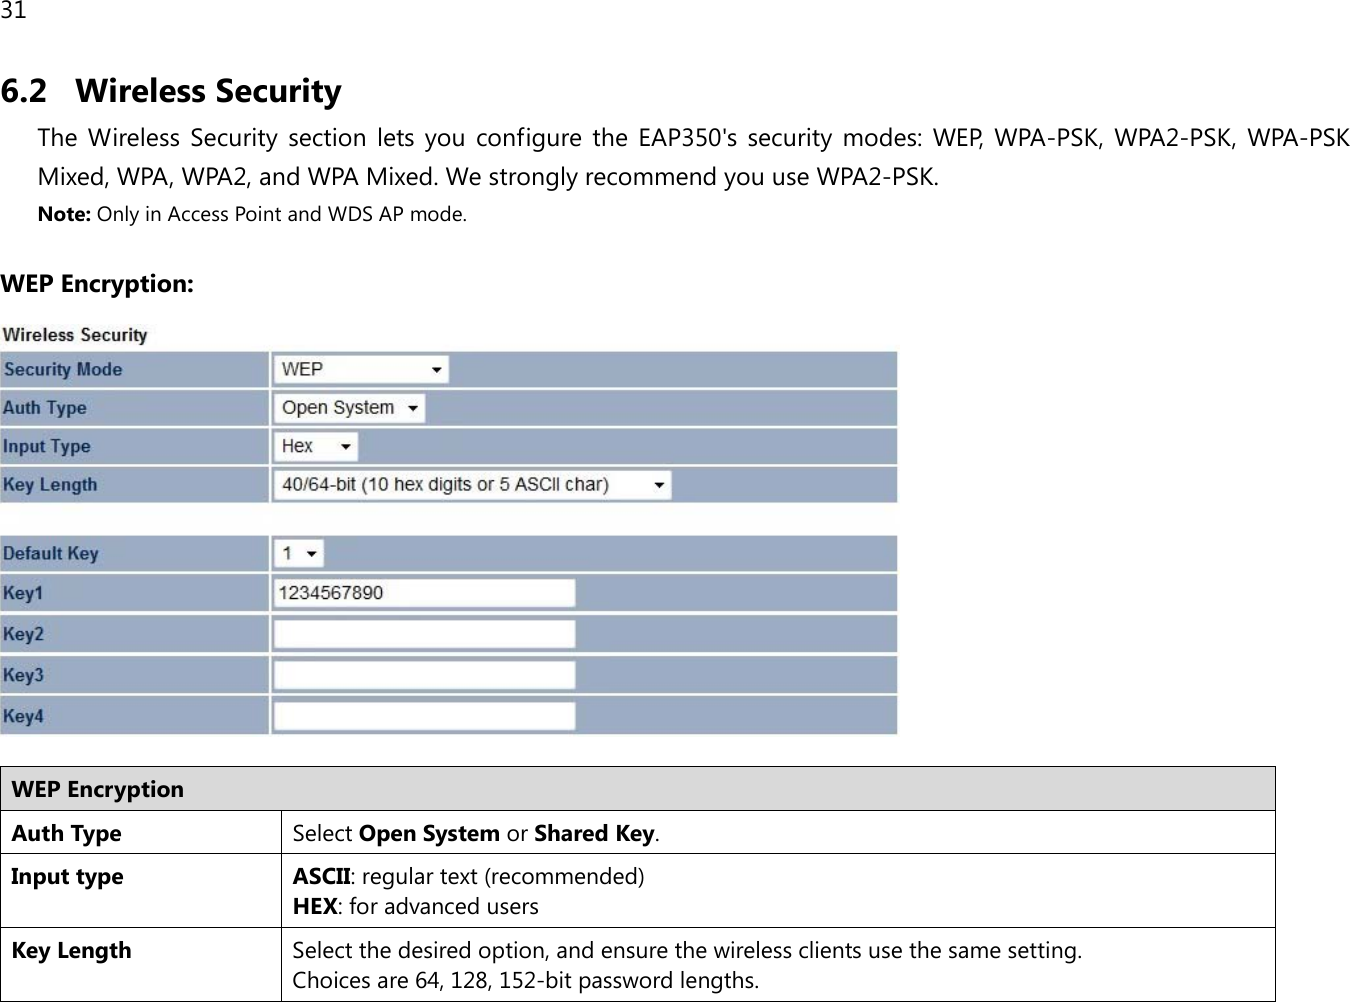 31  6.2 Wireless Security The Wireless Security section lets you configure the EAP350&apos;s security modes: WEP, WPA-PSK, WPA2-PSK, WPA-PSK Mixed, WPA, WPA2, and WPA Mixed. We strongly recommend you use WPA2-PSK.  Note: Only in Access Point and WDS AP mode.  WEP Encryption:   WEP Encryption Auth Type Select Open System or Shared Key. Input type ASCII: regular text (recommended) HEX: for advanced users Key Length Select the desired option, and ensure the wireless clients use the same setting. Choices are 64, 128, 152-bit password lengths. 